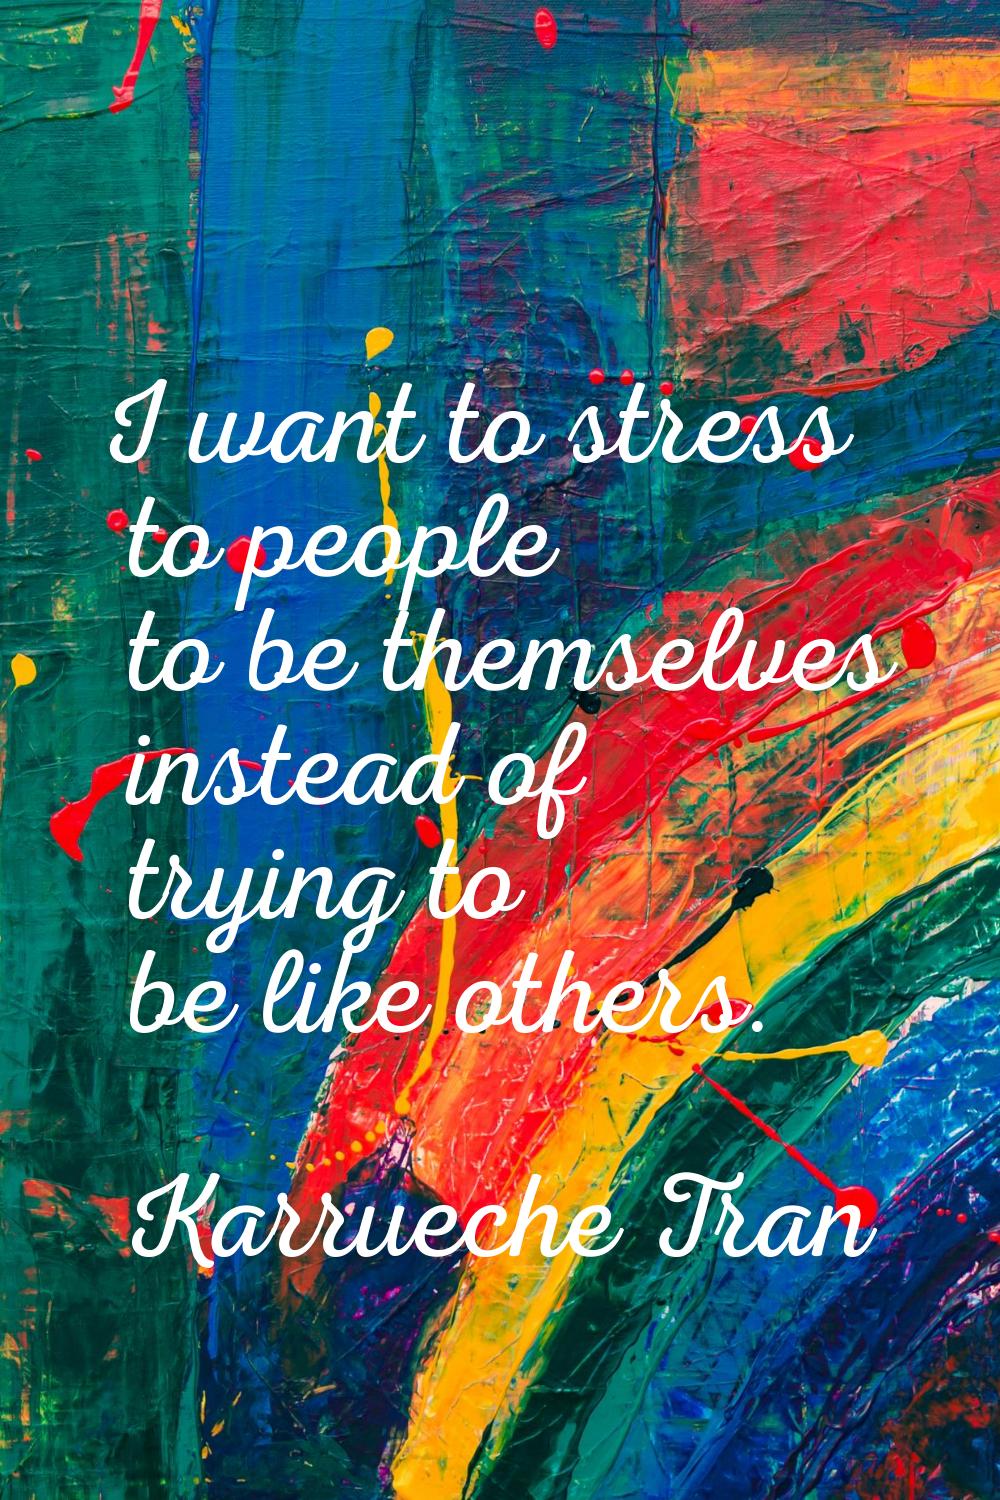 I want to stress to people to be themselves instead of trying to be like others.